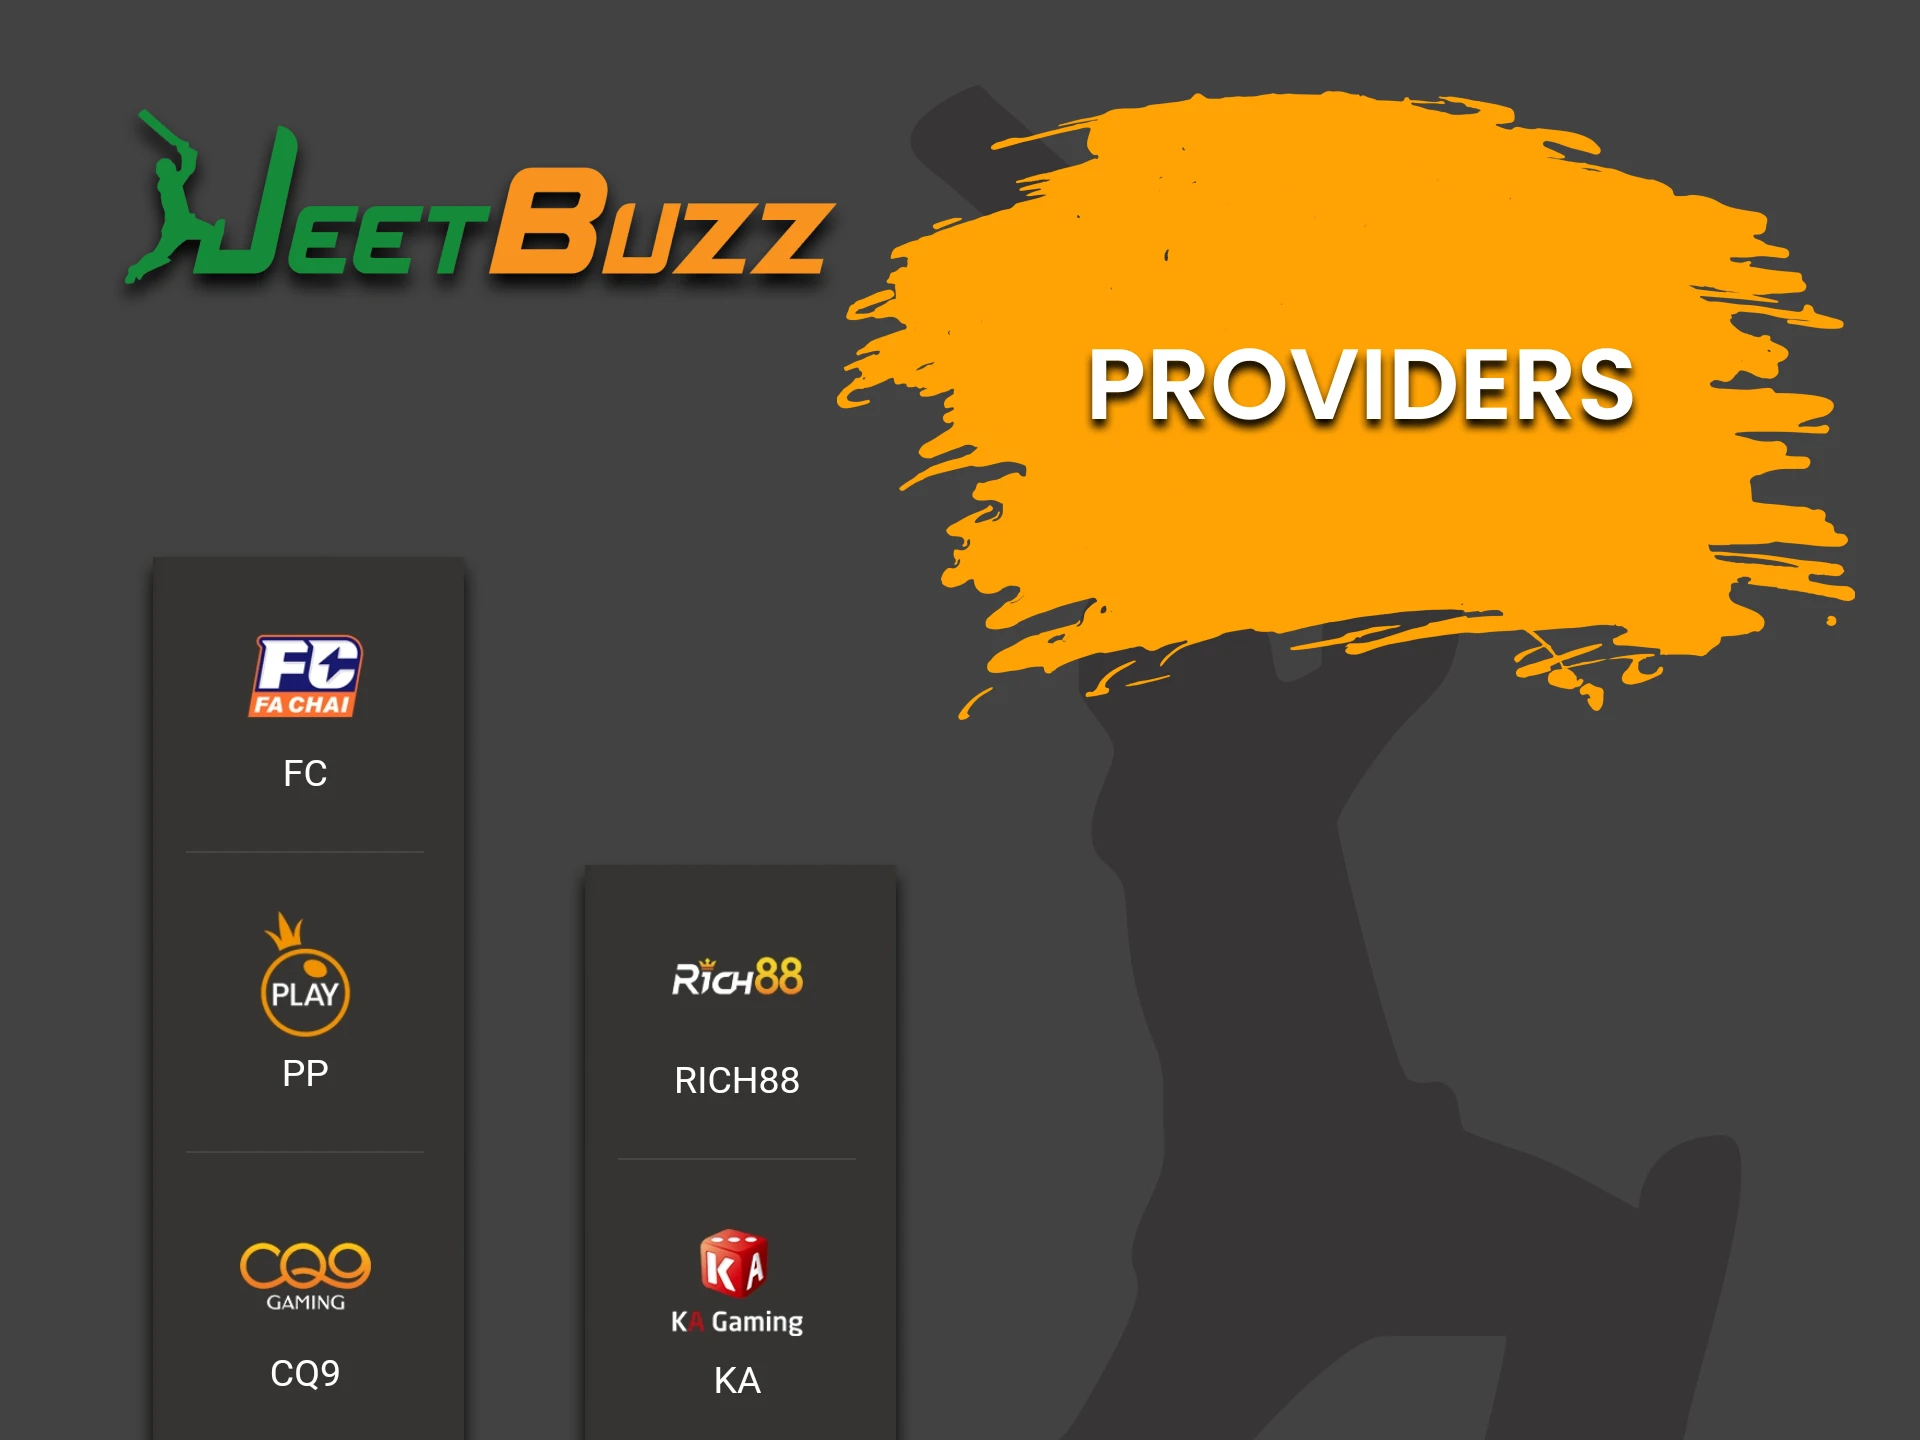 Learn about providers for the Arcade section of JeetBuzz.